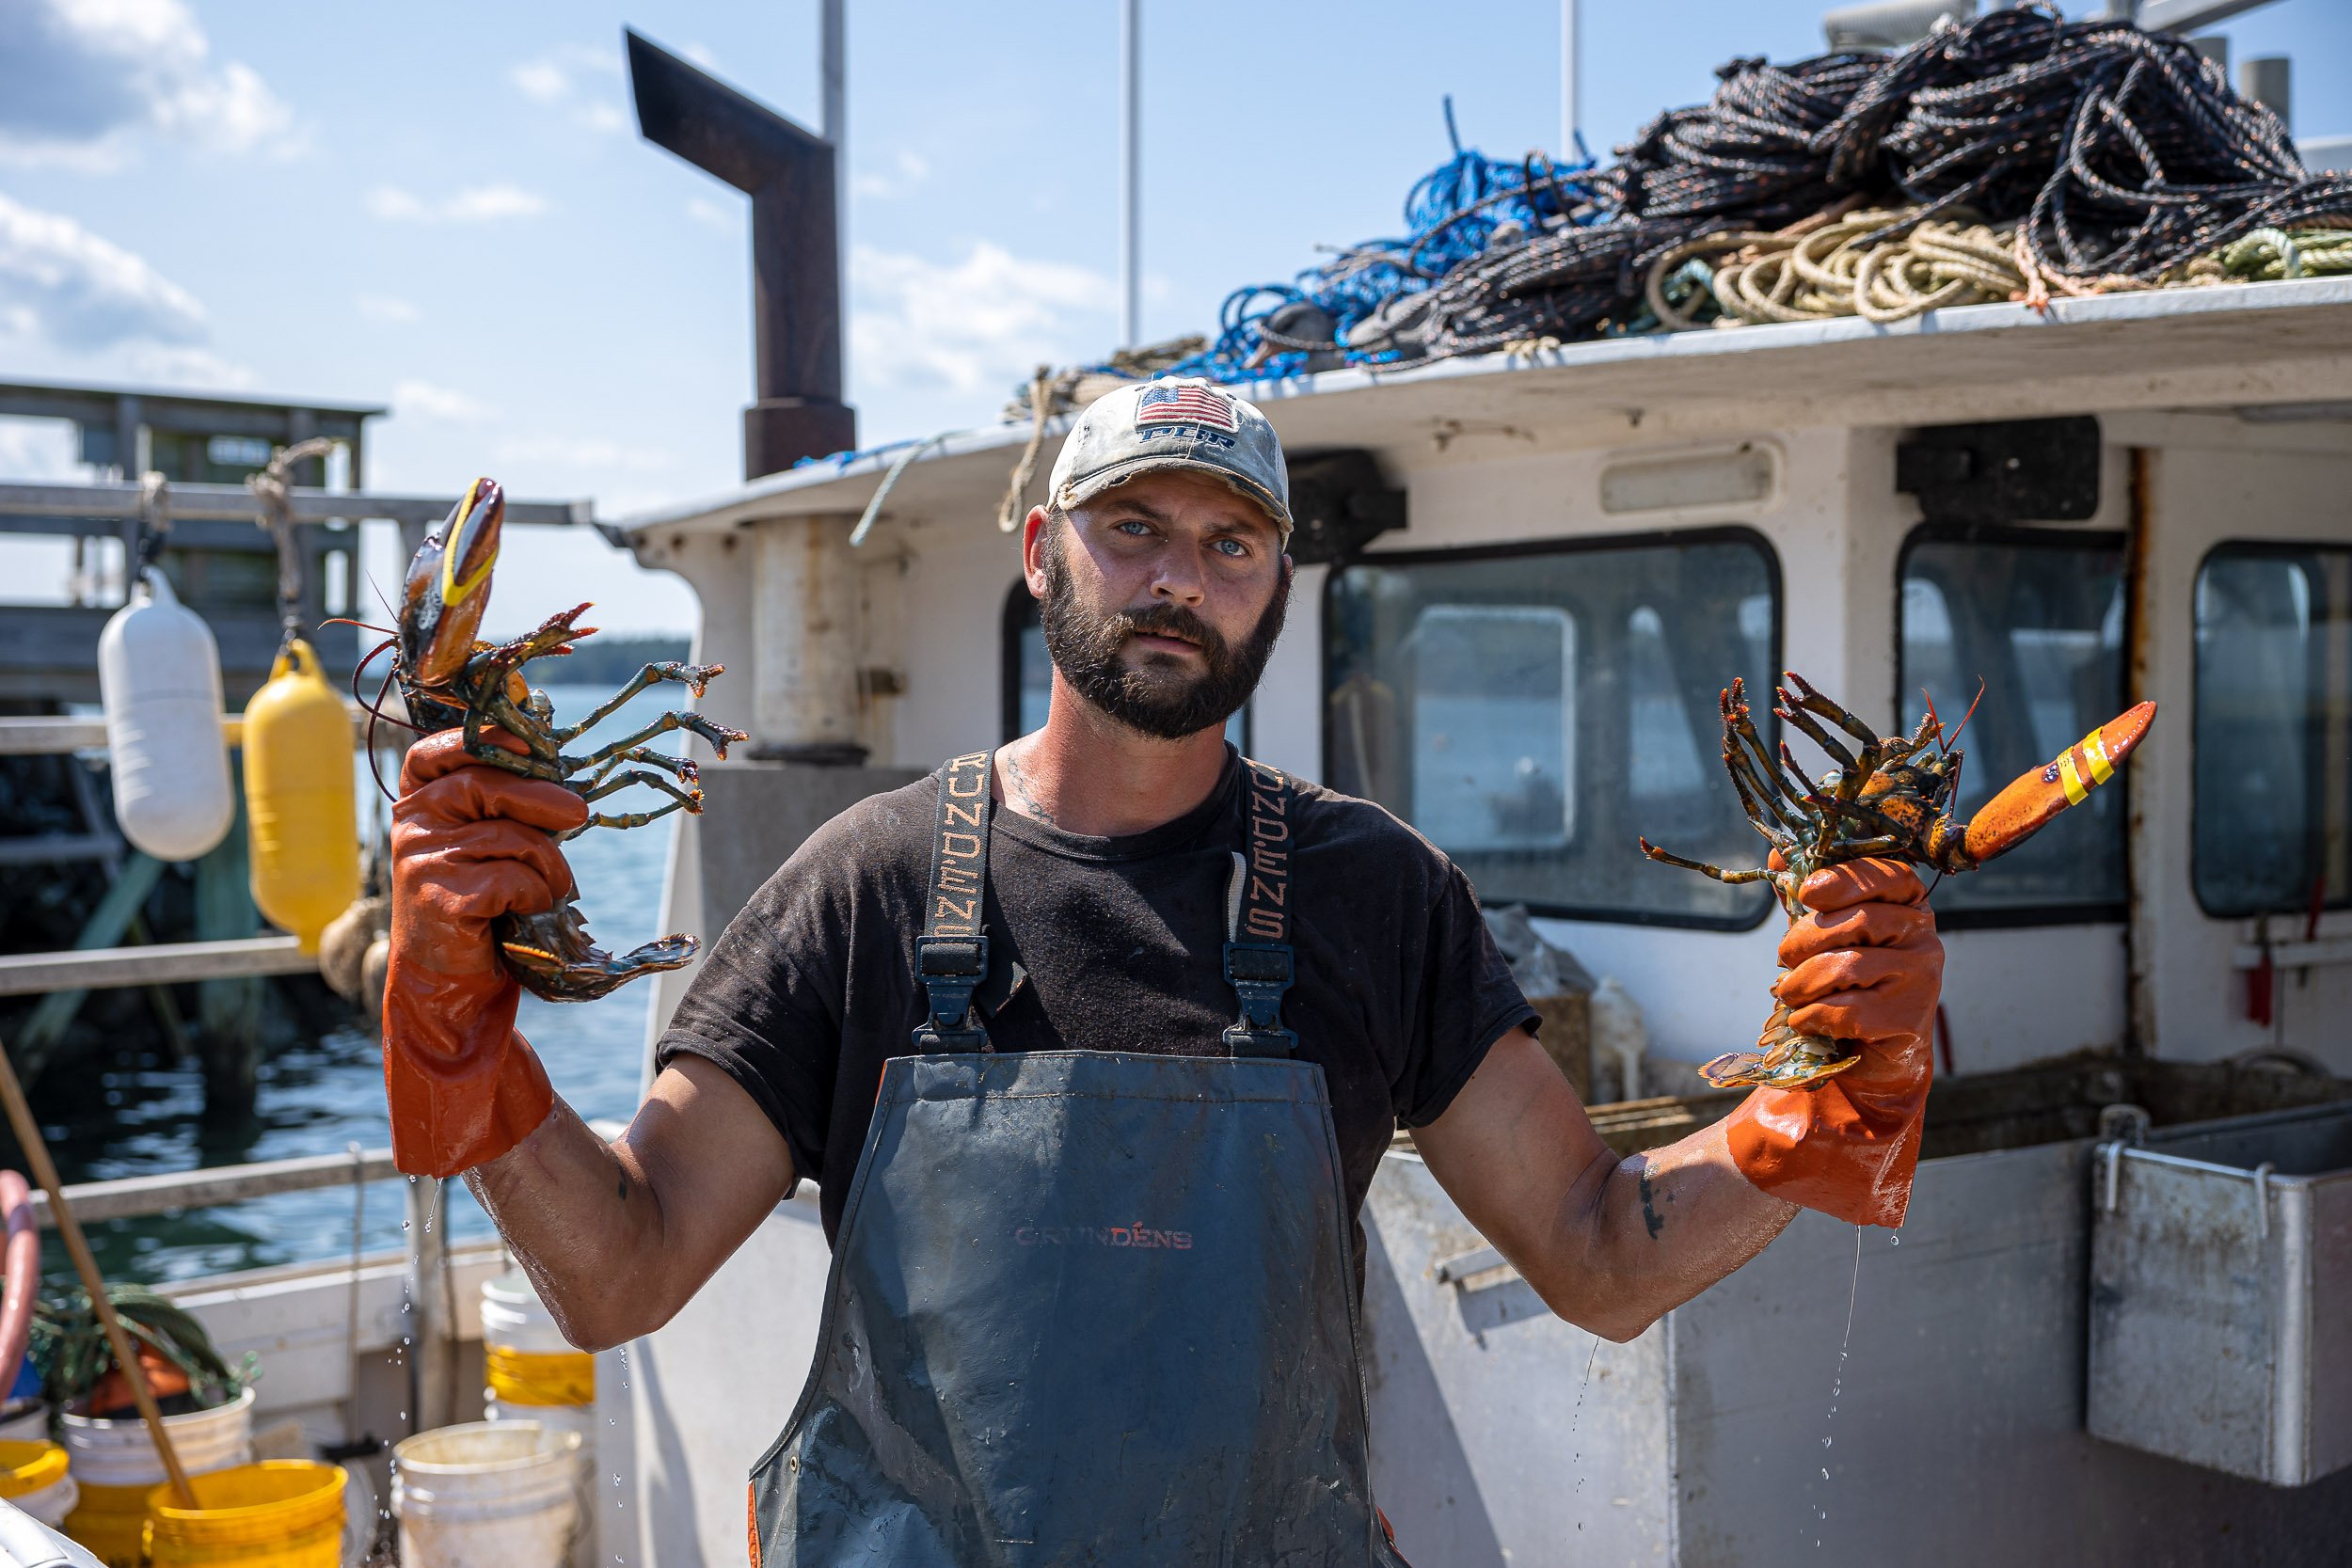  Lobster-boat sternman Jeremy White shows off part of the day’s catch while docked in South Gouldsboro, Maine Aug. 27, 2021. 